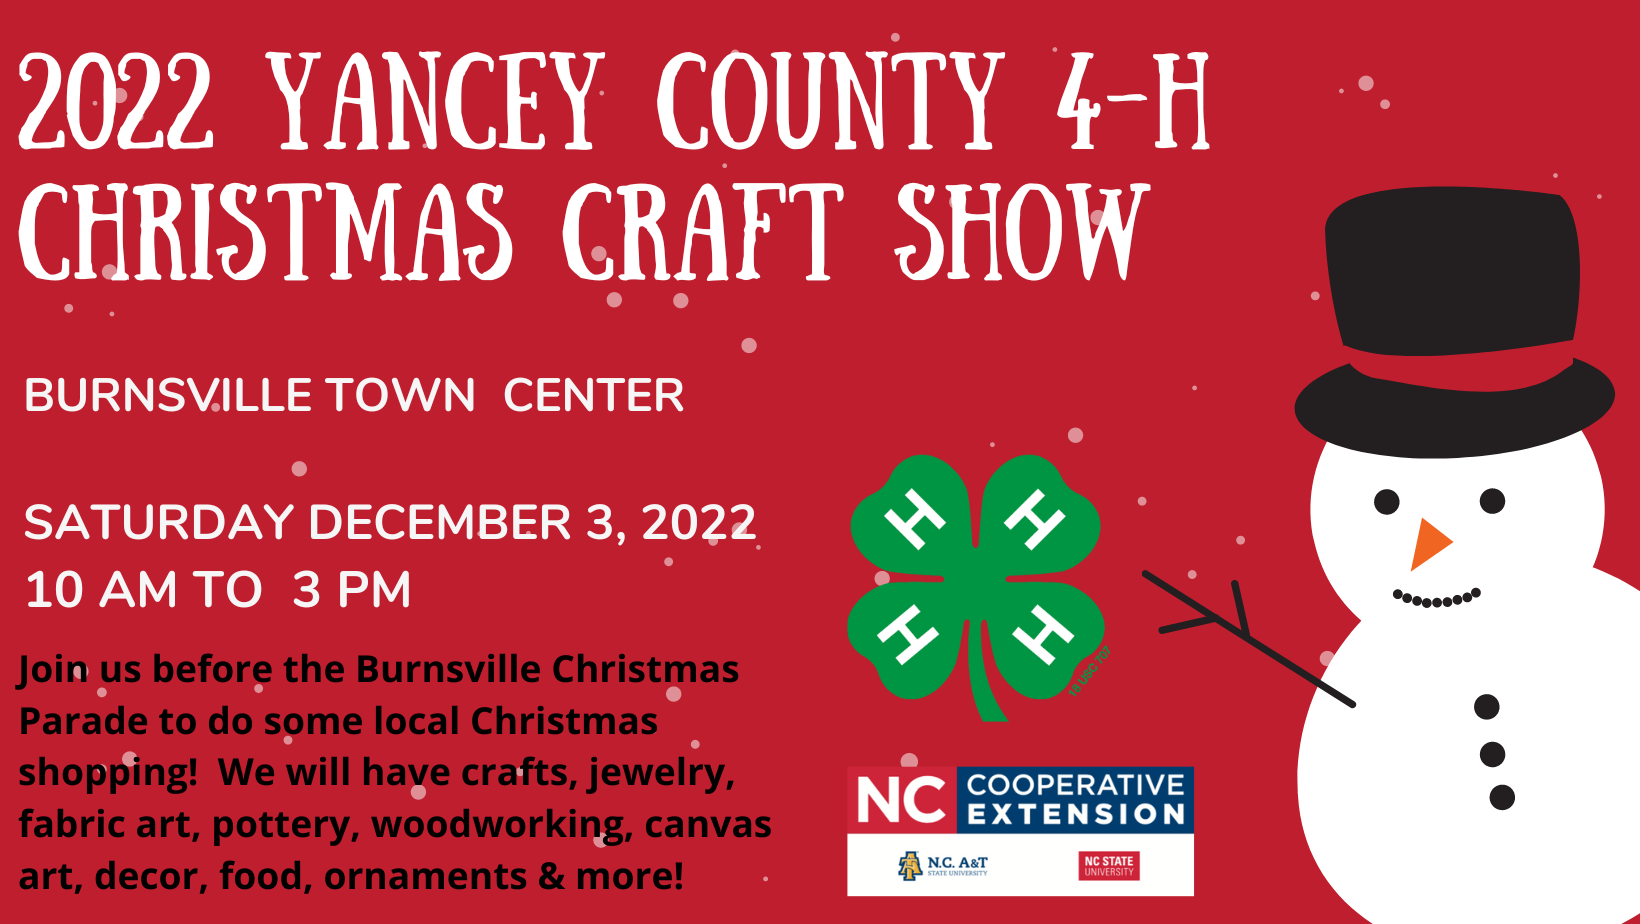 2022 Yancey County 4-H Christmas Craft Show